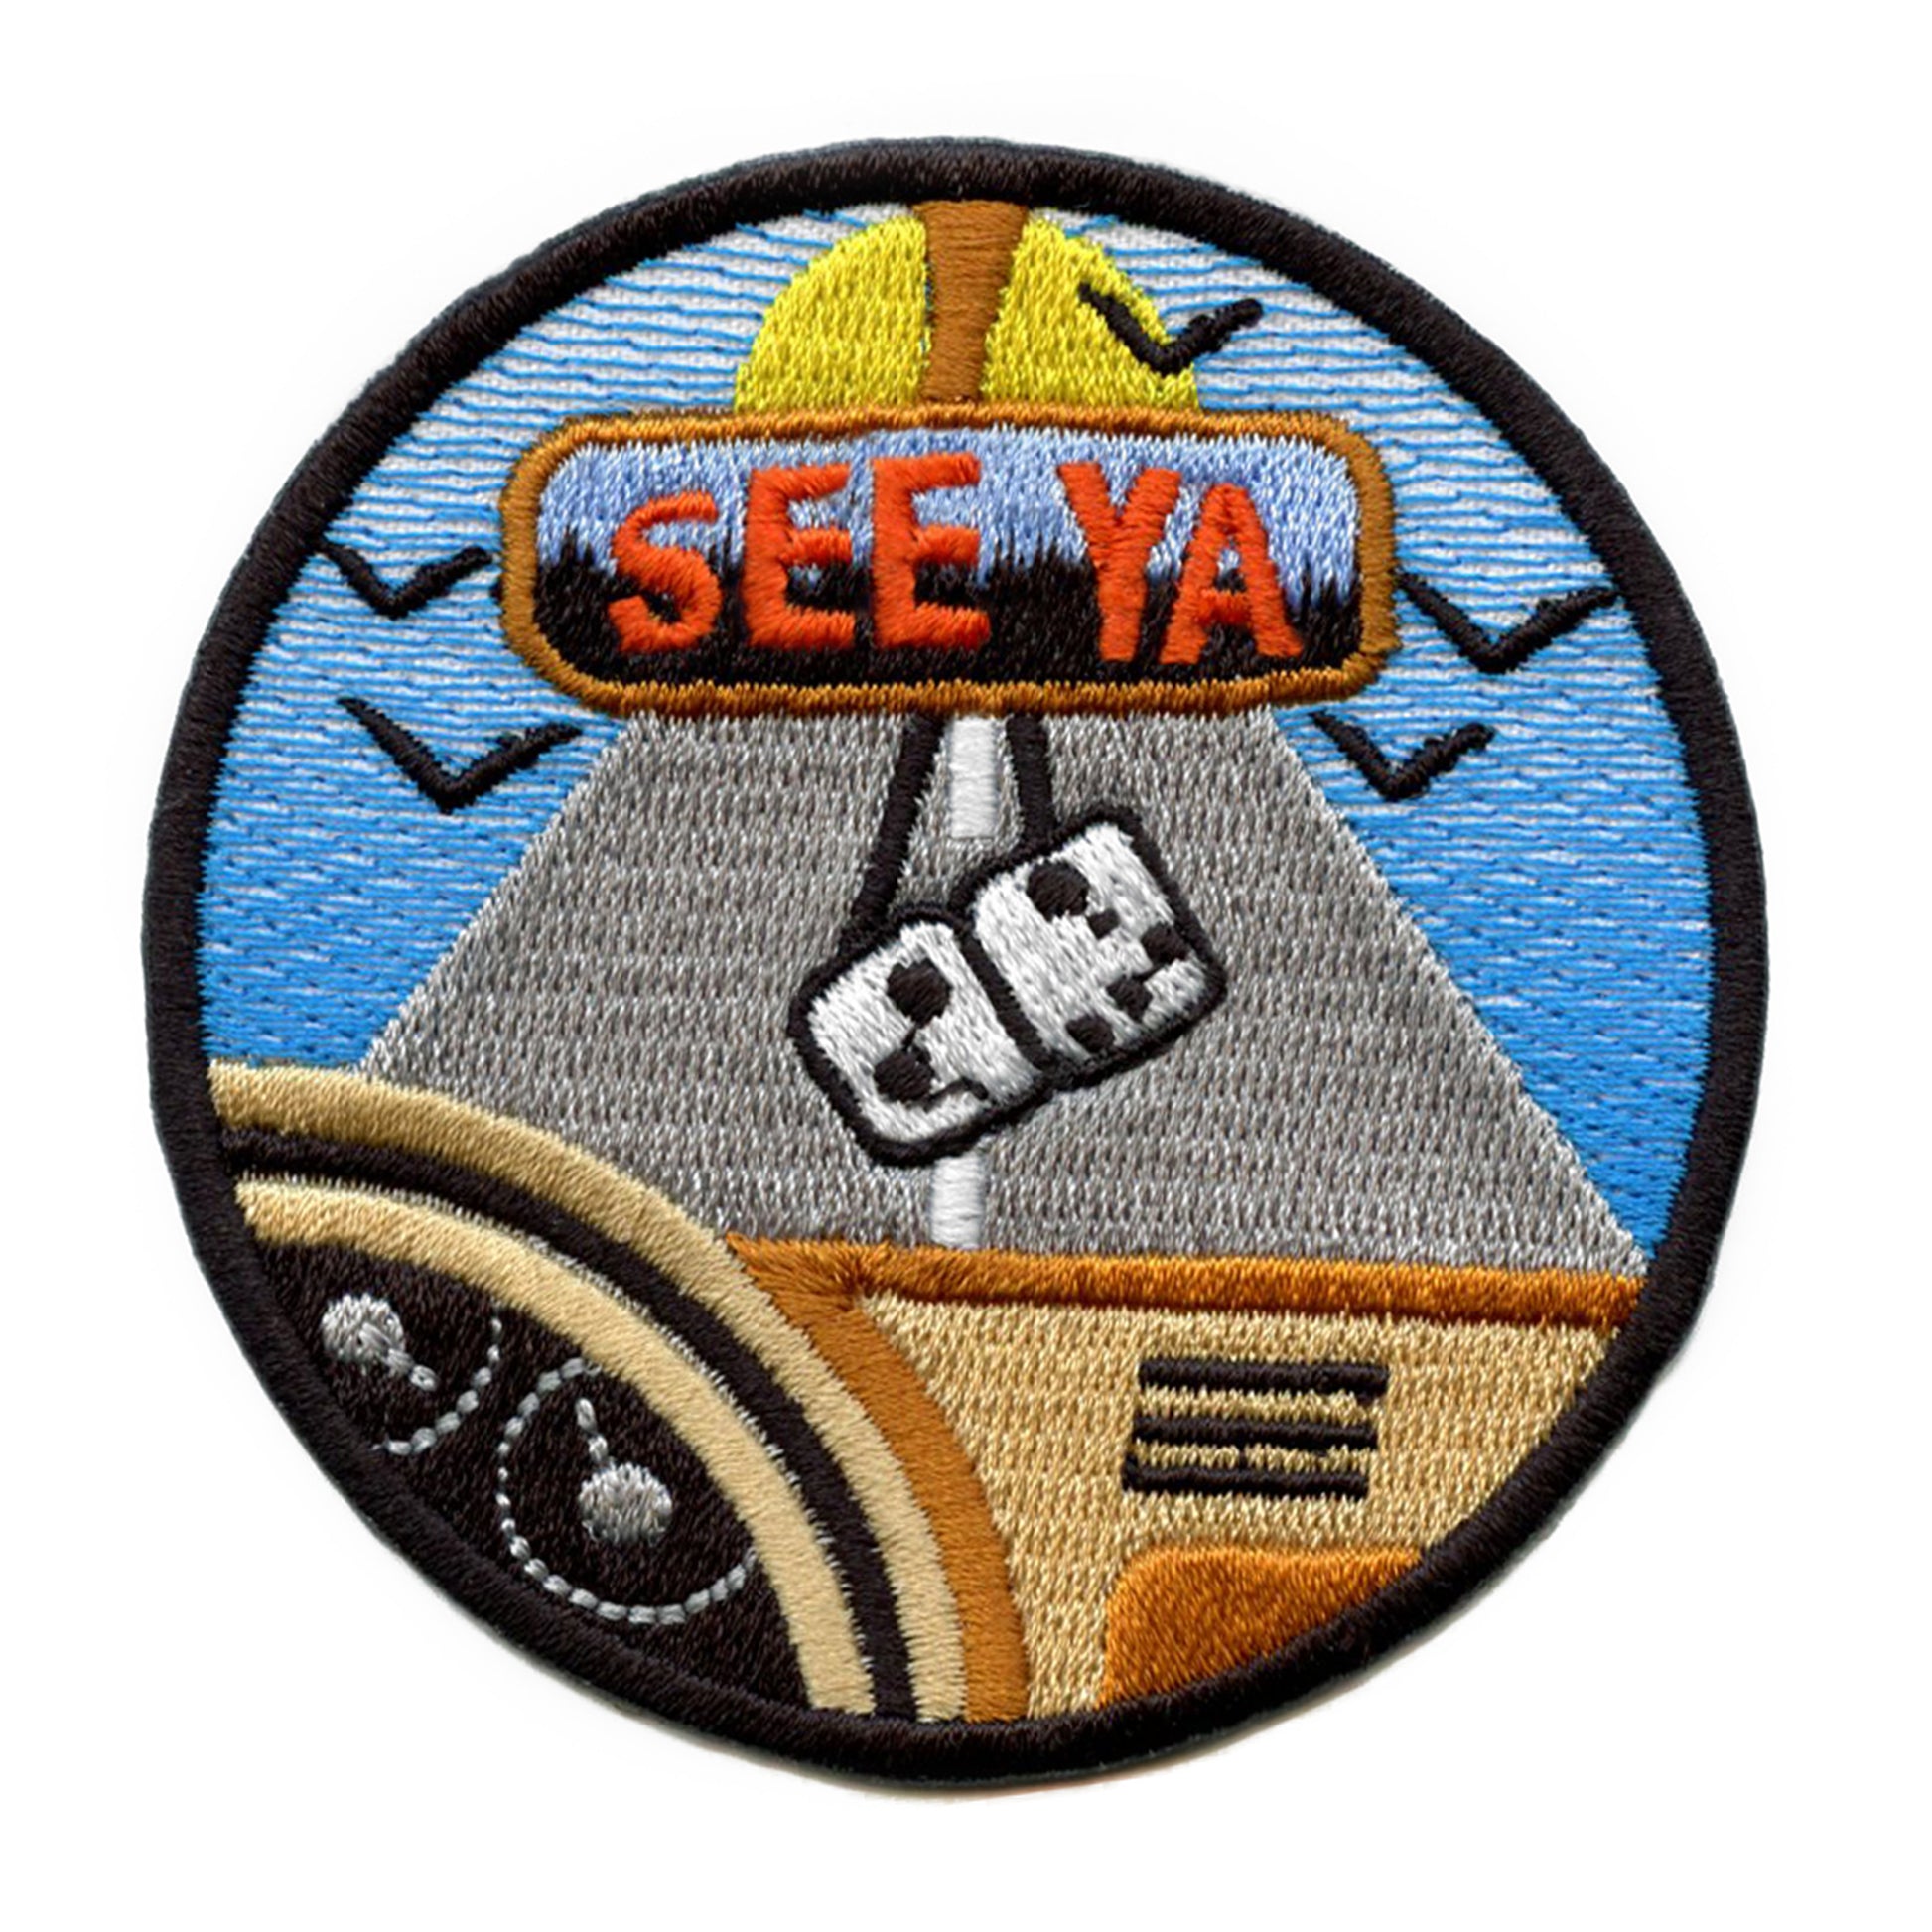 See Ya Travel Patch Car Dice Ocean Embroidered Iron On